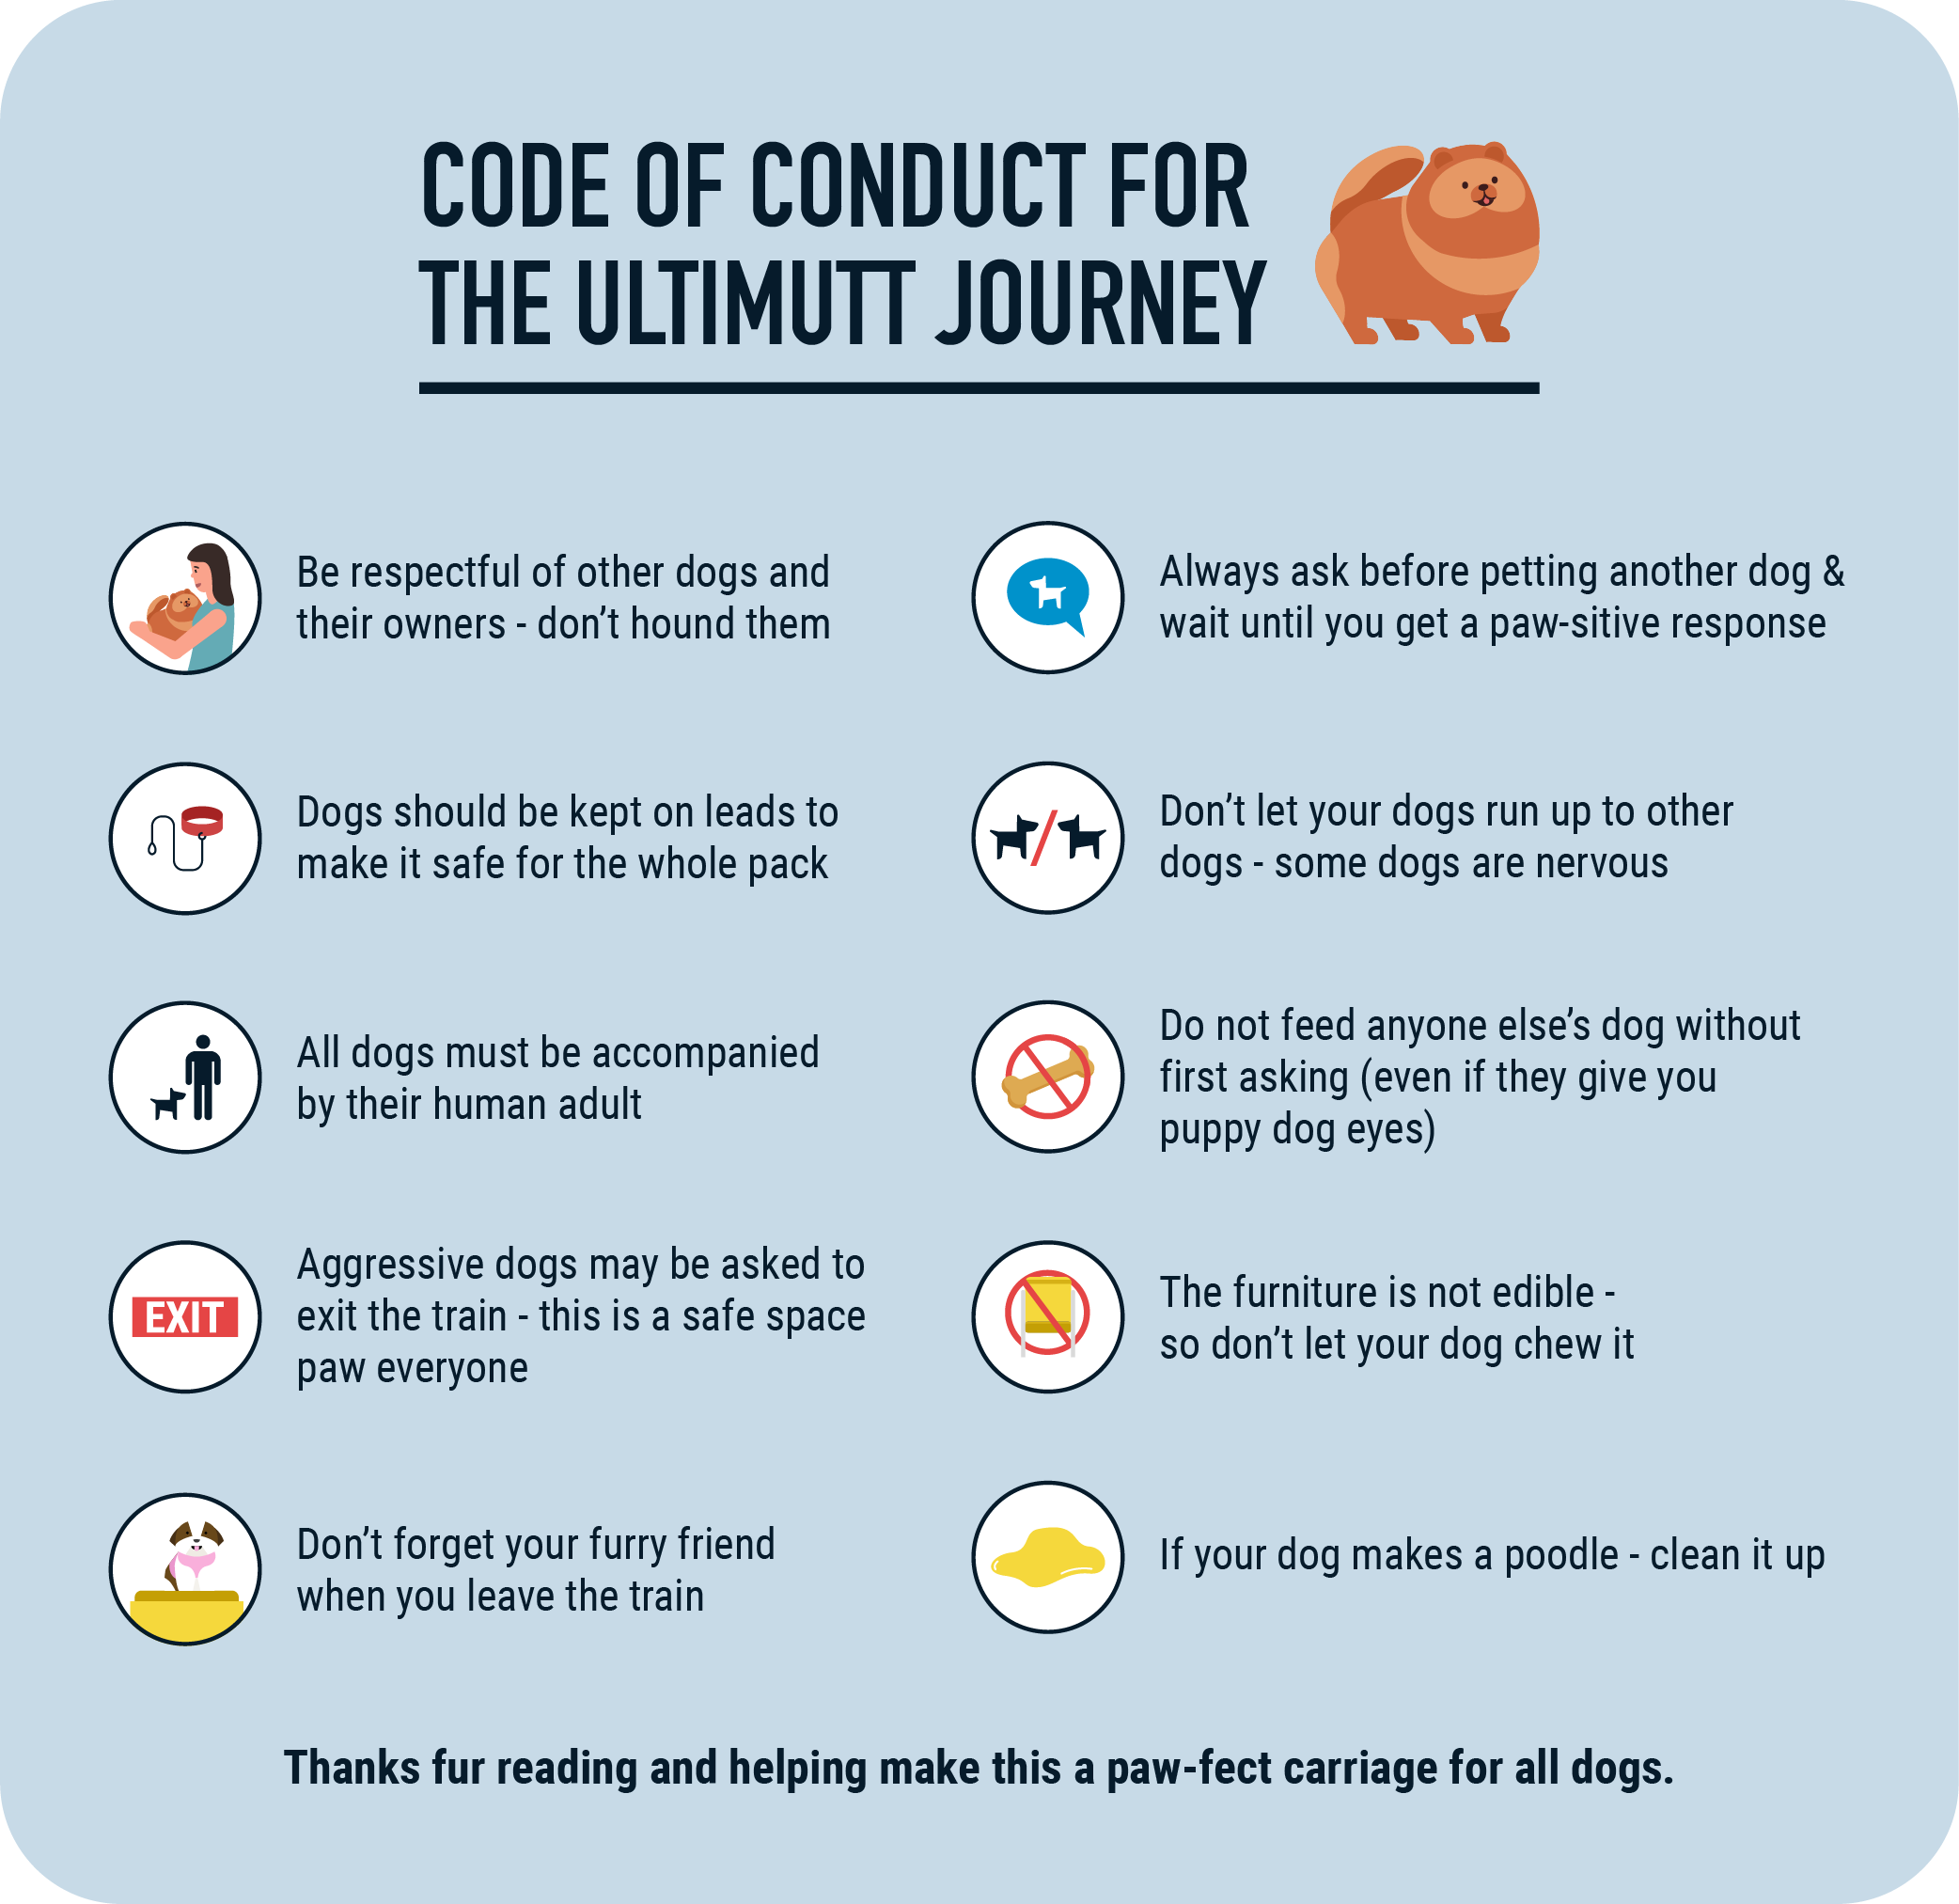 Our code of conduct for the 'ultimutt' journey